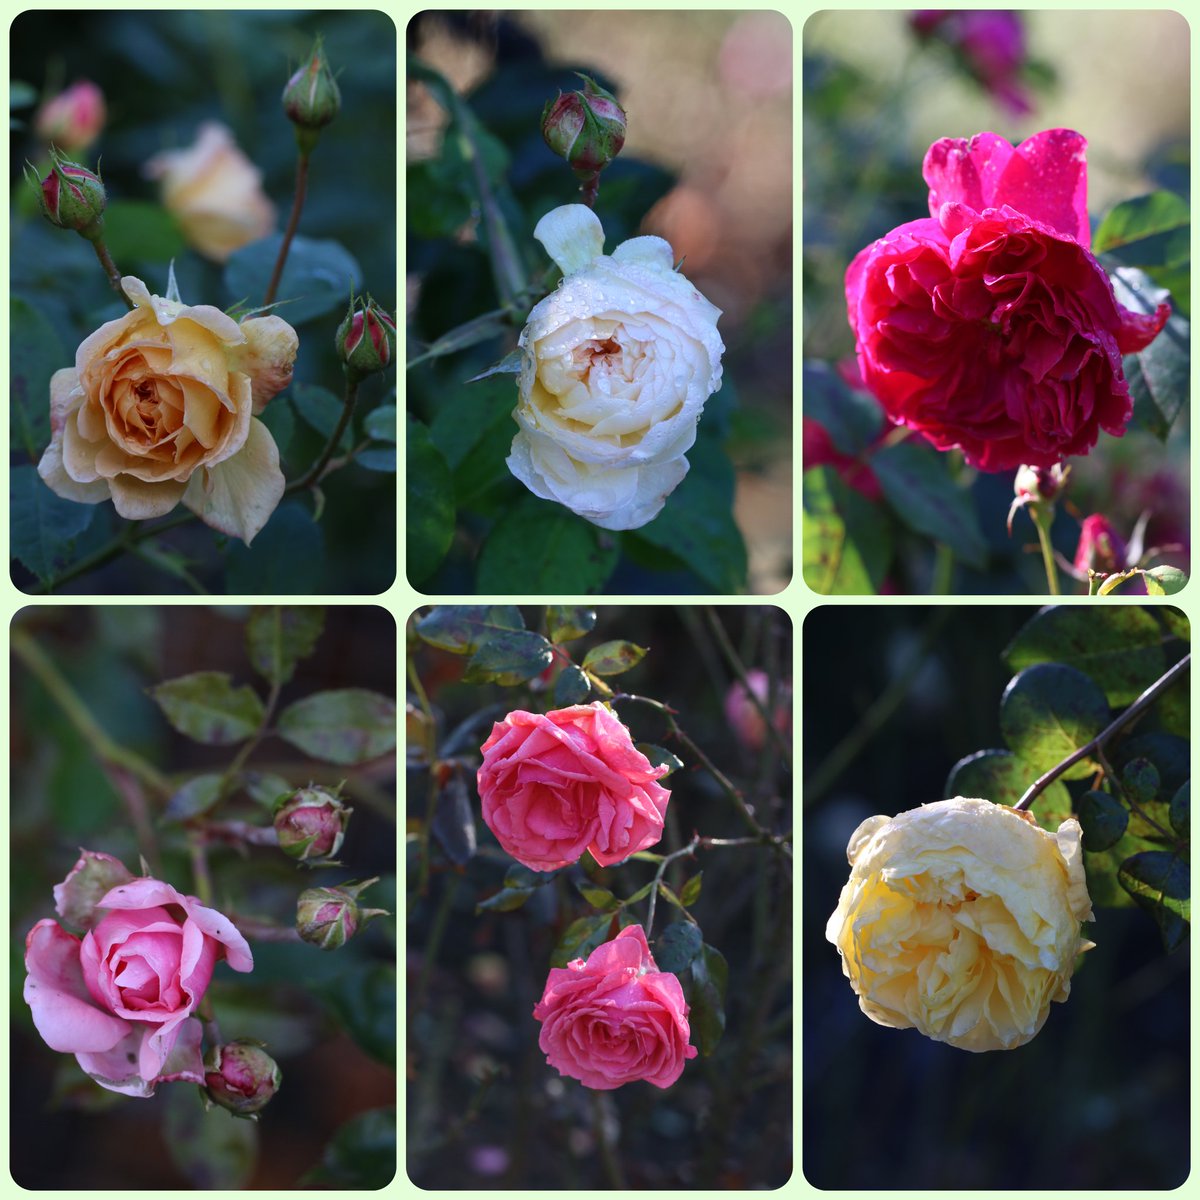 A collection of October roses for #RoseWednesday courtesy of the wonderful rose garden at #DunhamMassey #Altrincham #Cheshire #NationalTrust